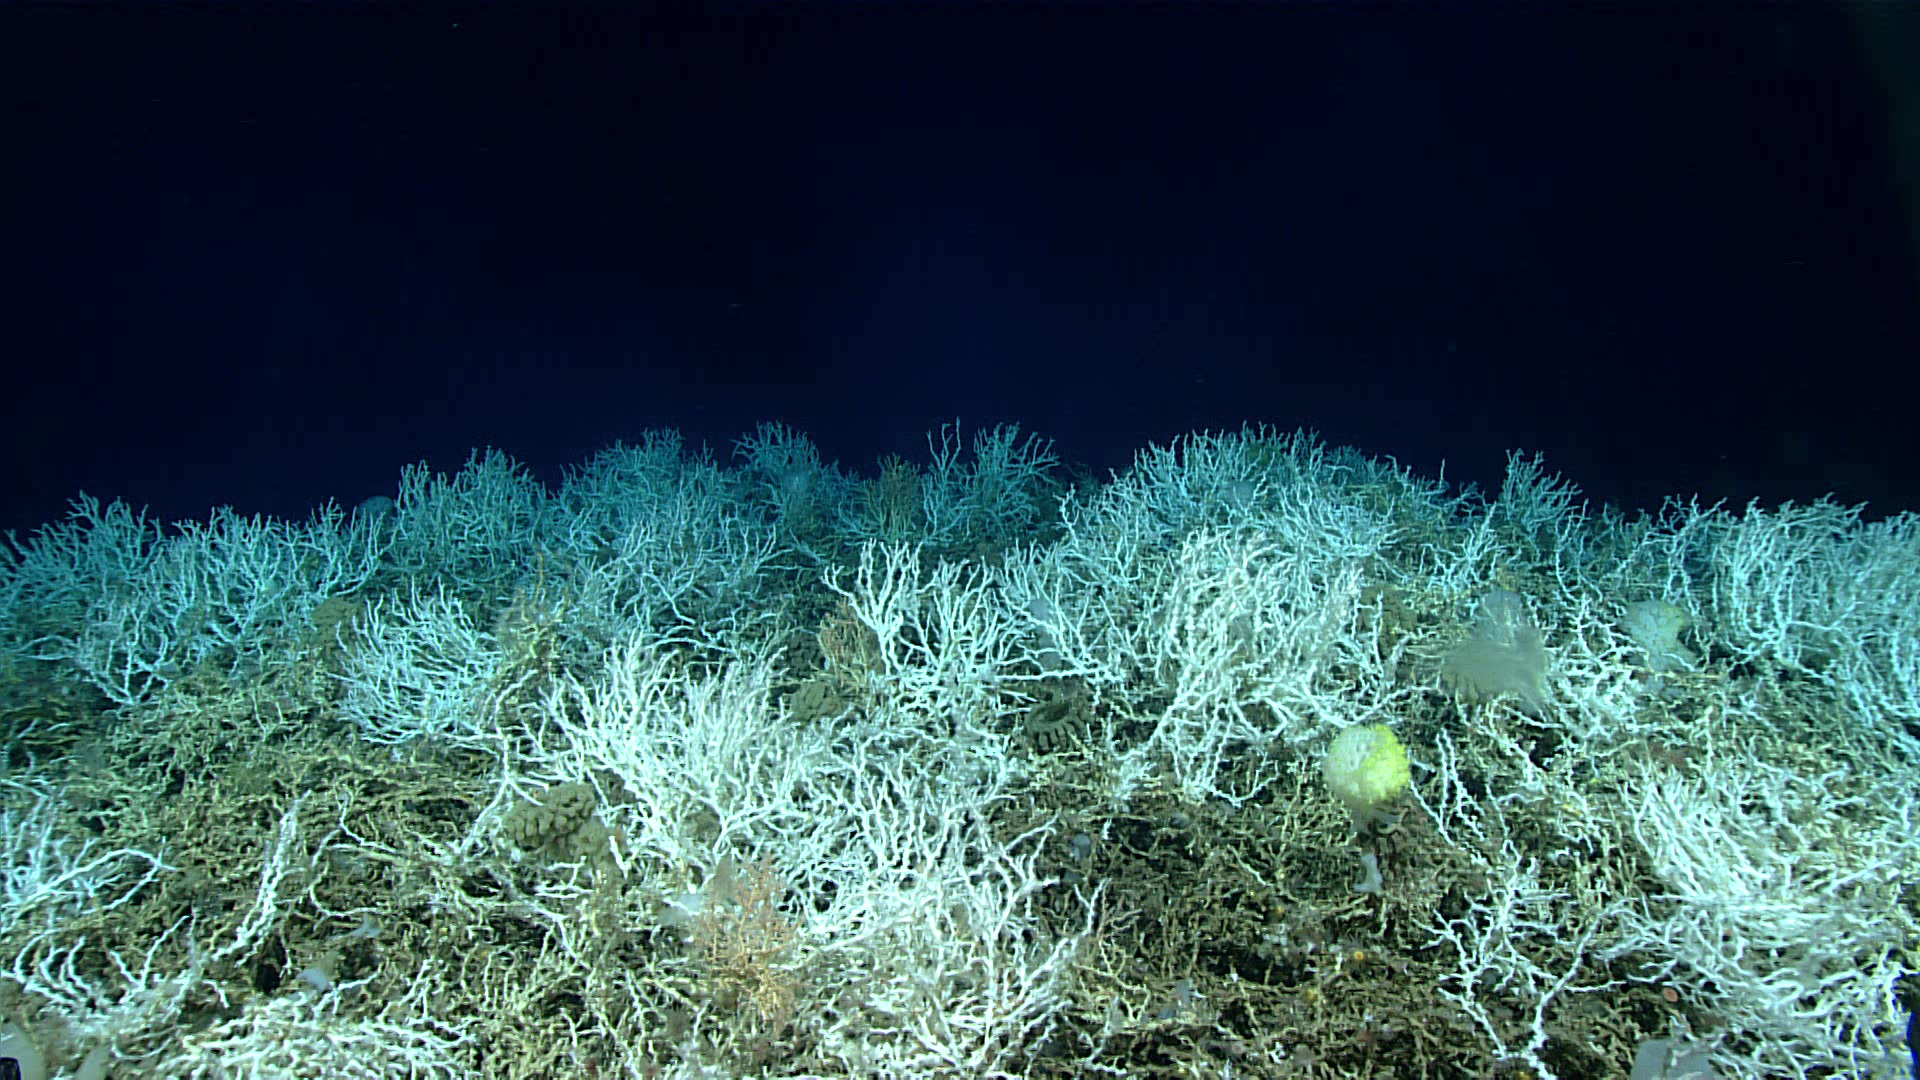 This image shows a section of the coral mounds discovered during the Windows to the Deep 2019 expedition